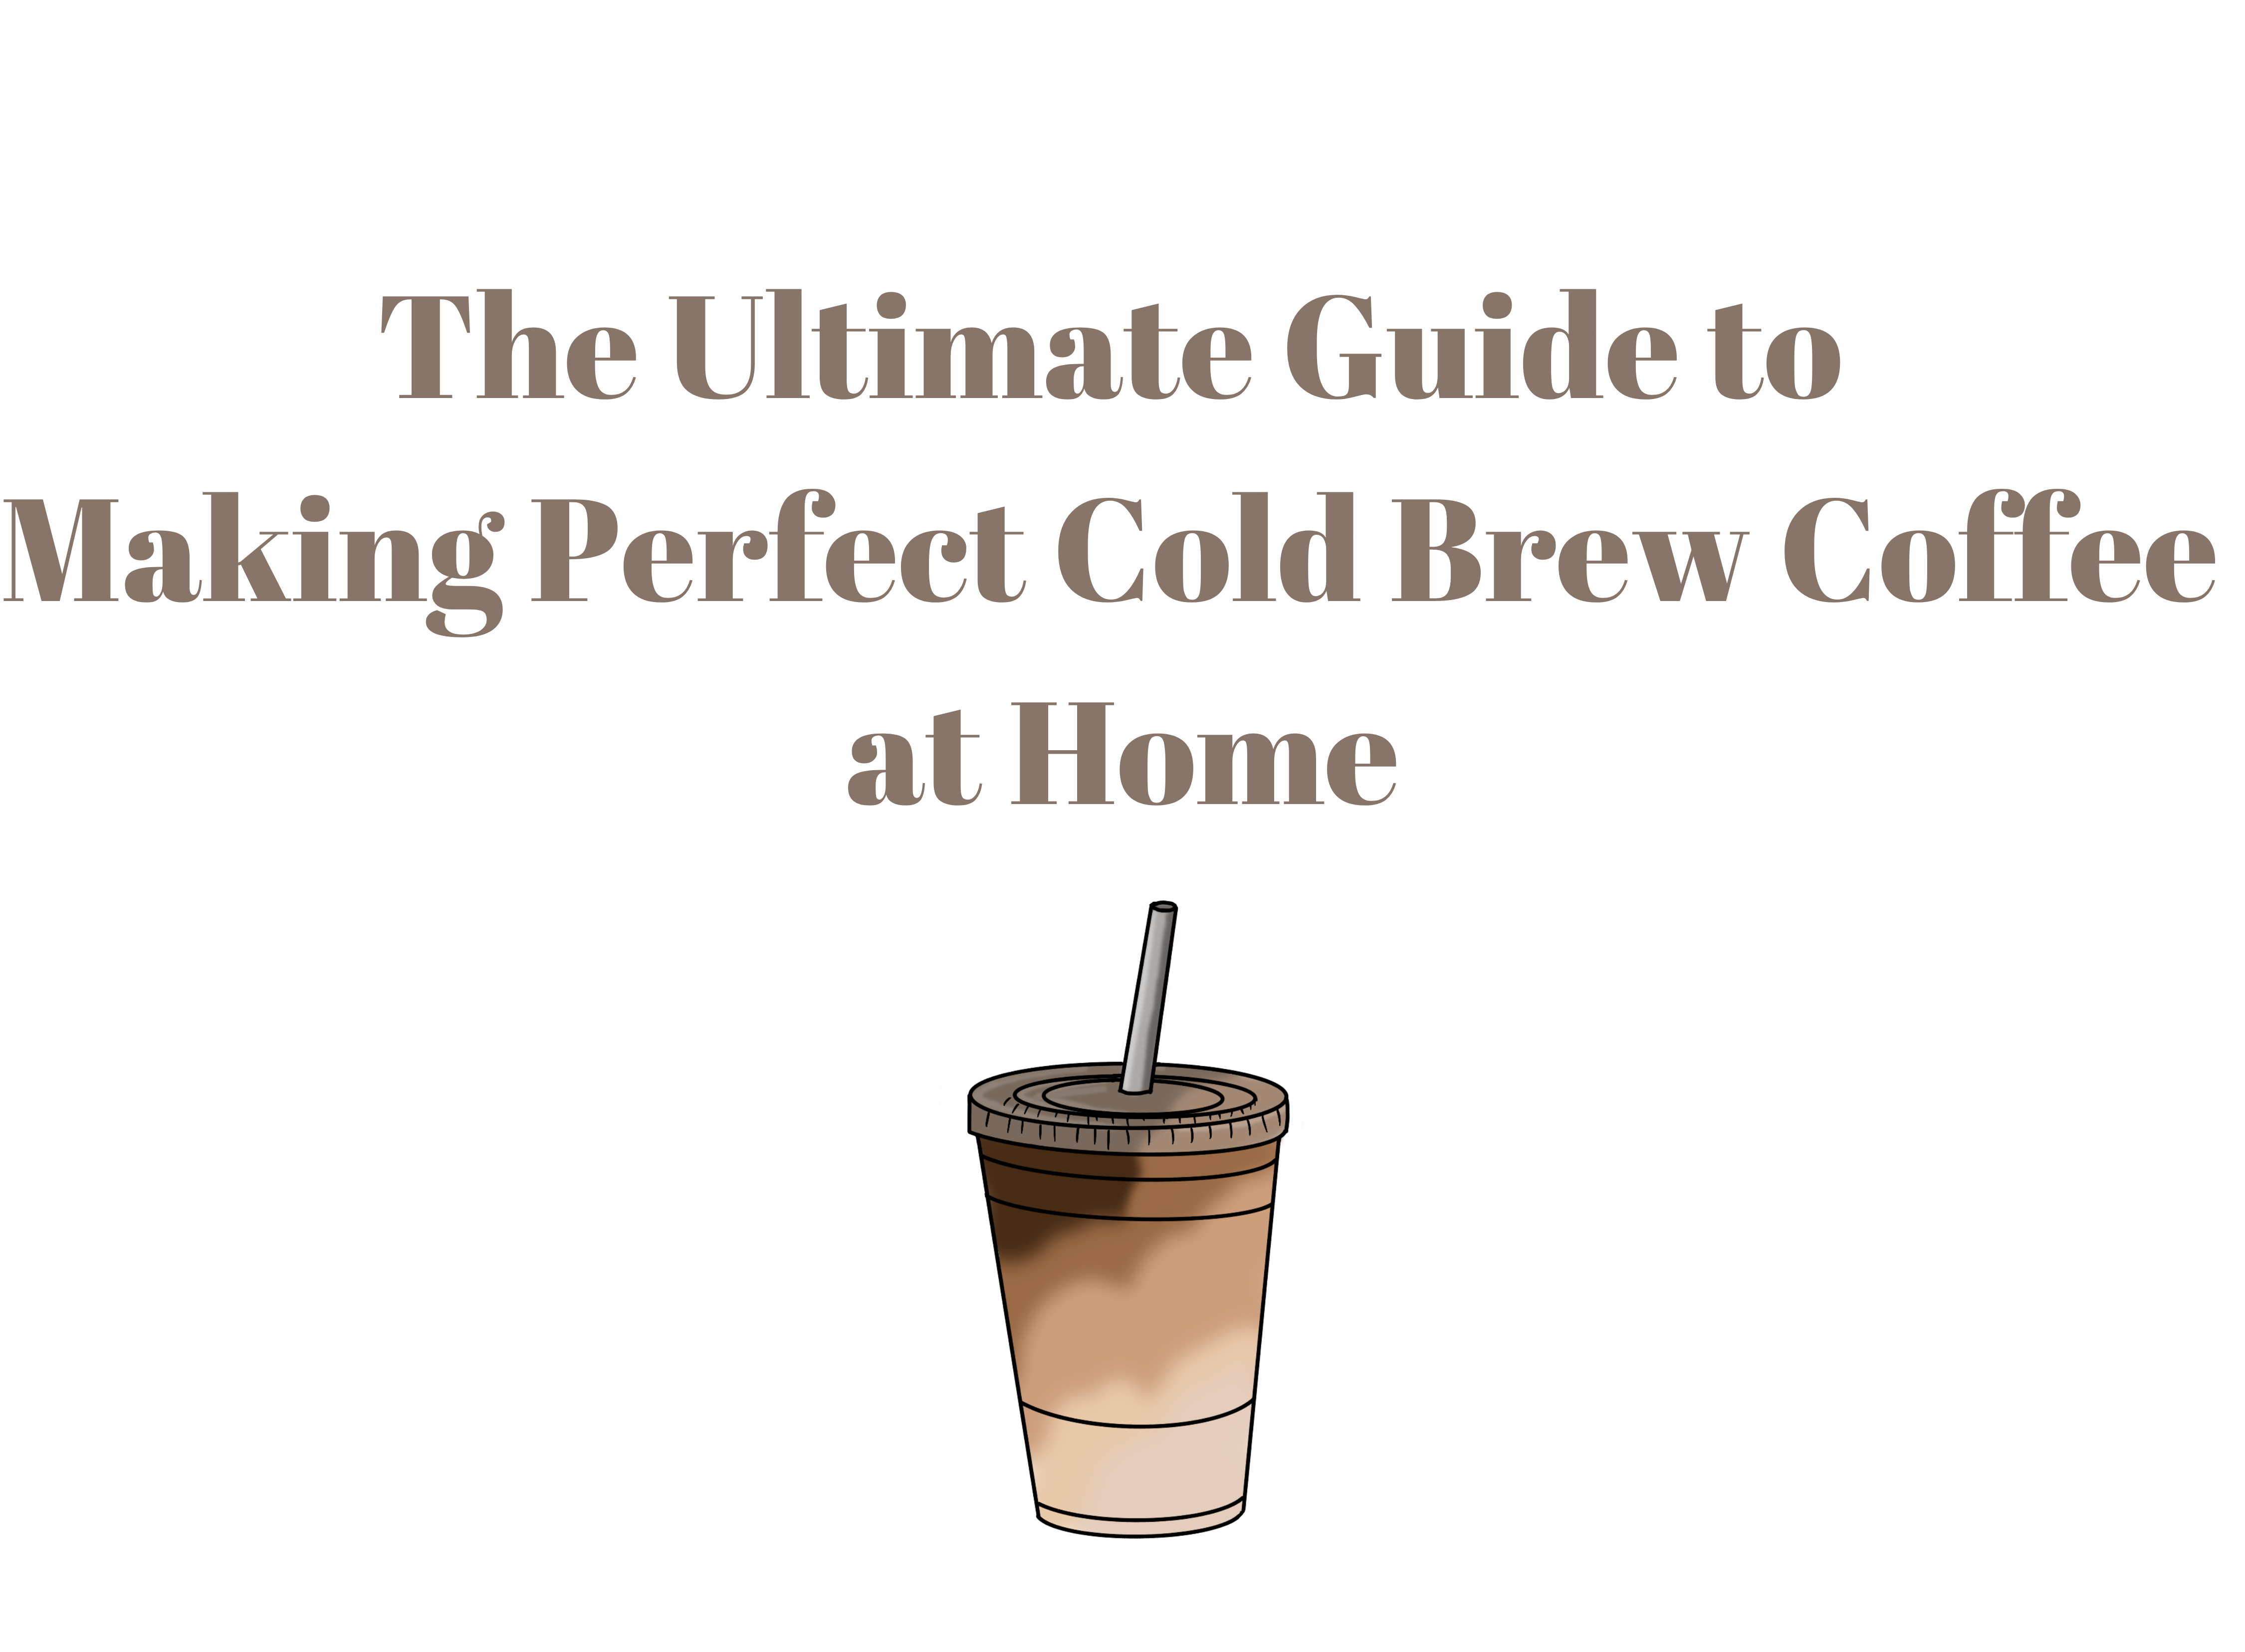 The Ultimate Guide to Making Perfect Cold Brew Coffee at Home